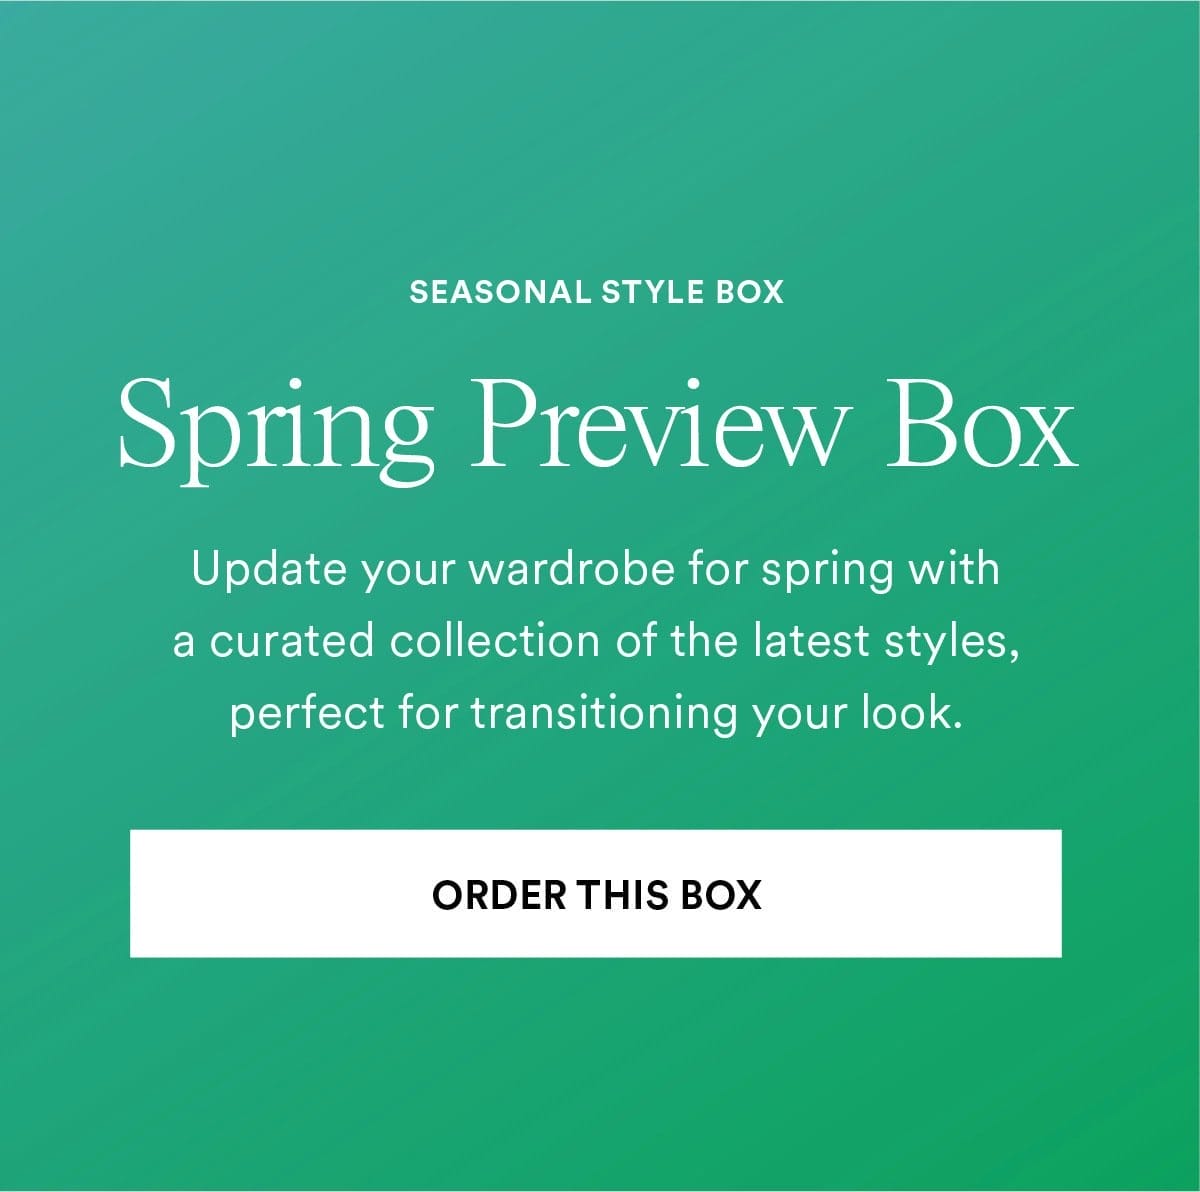 Spring Preview Box Update your wardrobe for spring with a curated collection of the latest styles, perfect fortransitioning your look. Order This Box